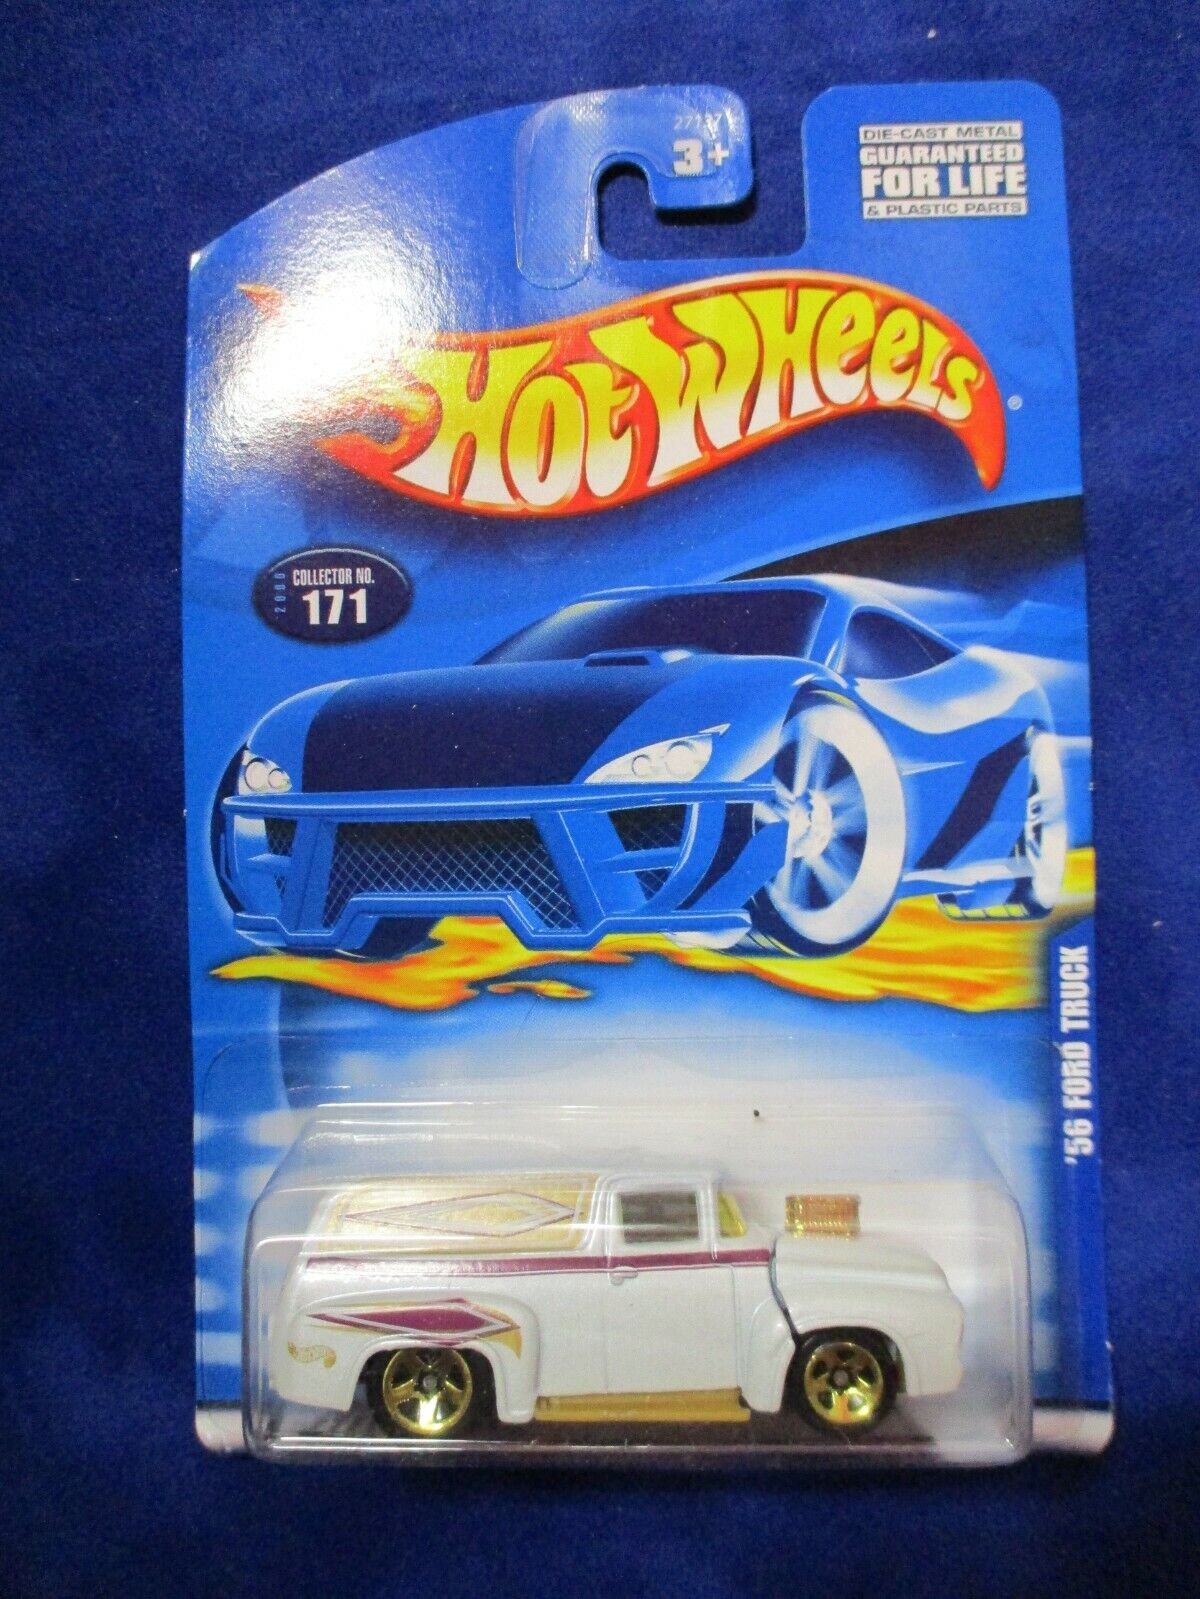 Hot Wheels Mattel Wheels '56 Ford Truck 2000 Collector No. 171 White/Pearl